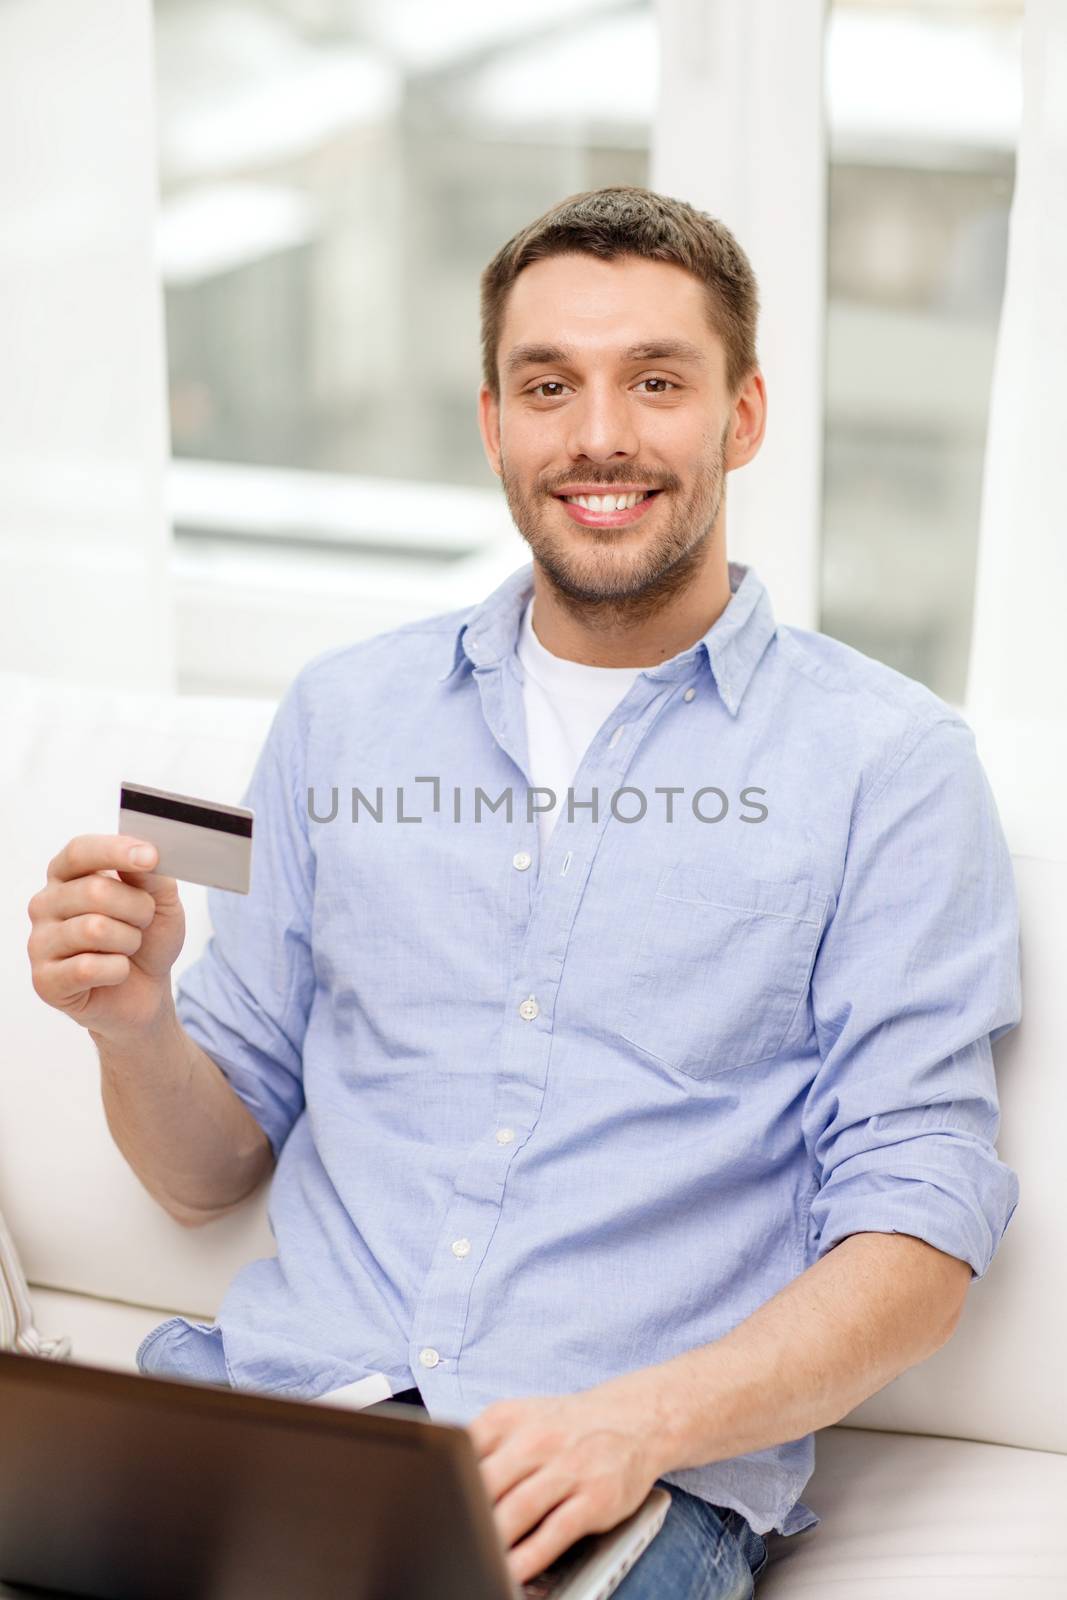 technology, home and lifestyle concept - smiling man working with laptop and credit card at home